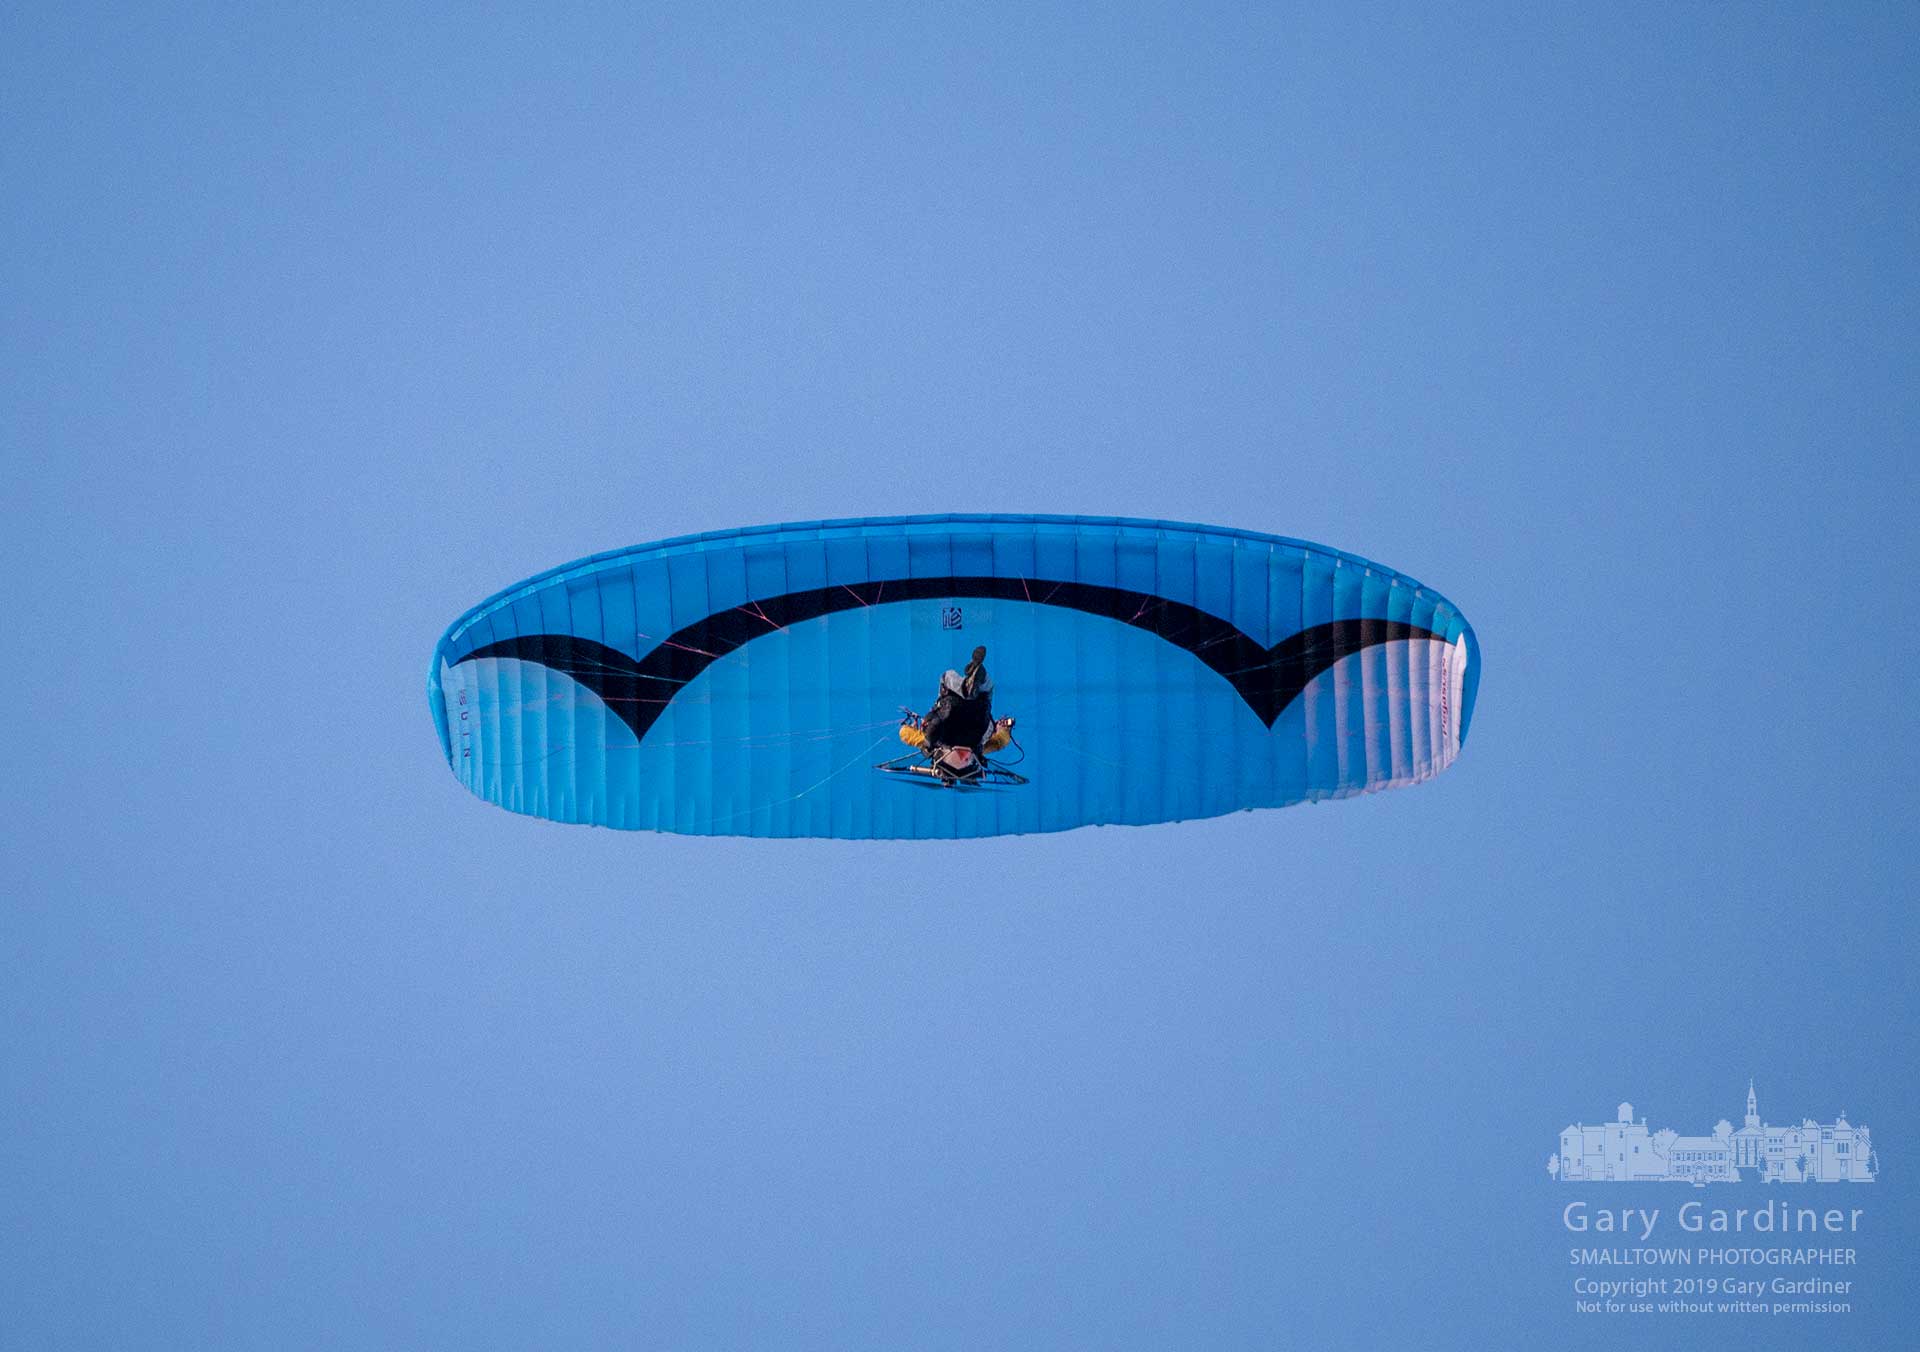 A parasailer floats over one of the fields at the Westerville Sports Complex on Cleveland Ave. just as the sun sets. My Final Photo for Oct. 13, 2019.